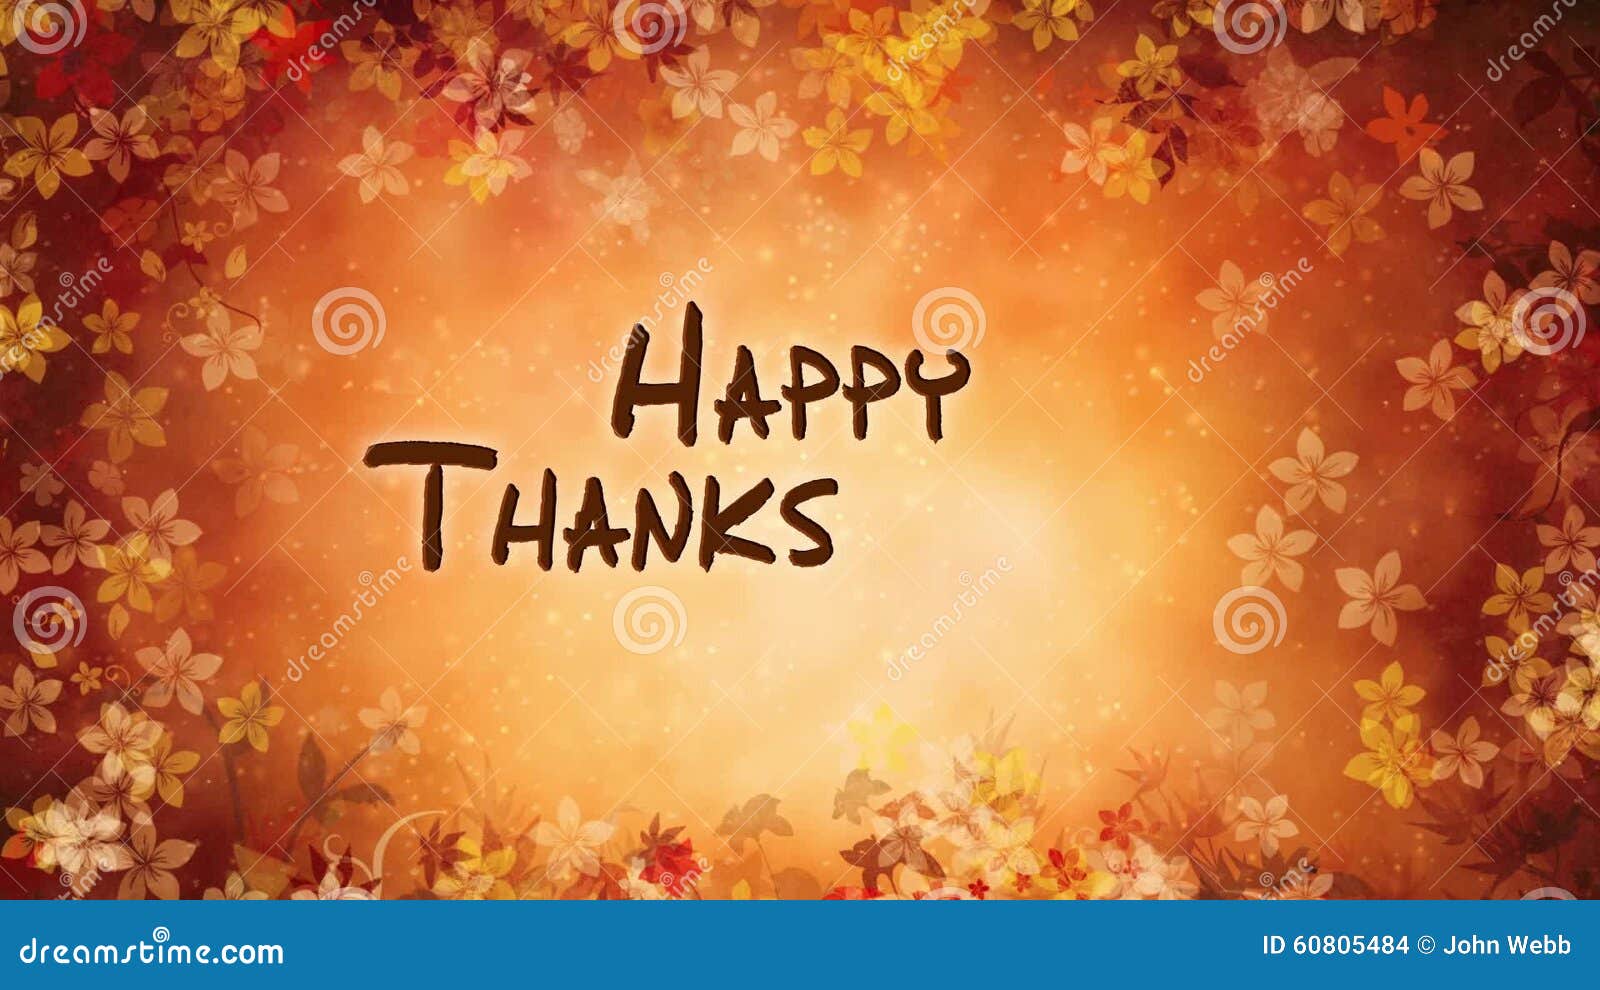 Happy Thanksgiving Autumn Flowers Stock Footage - Video of celebrate,  blessing: 60805484